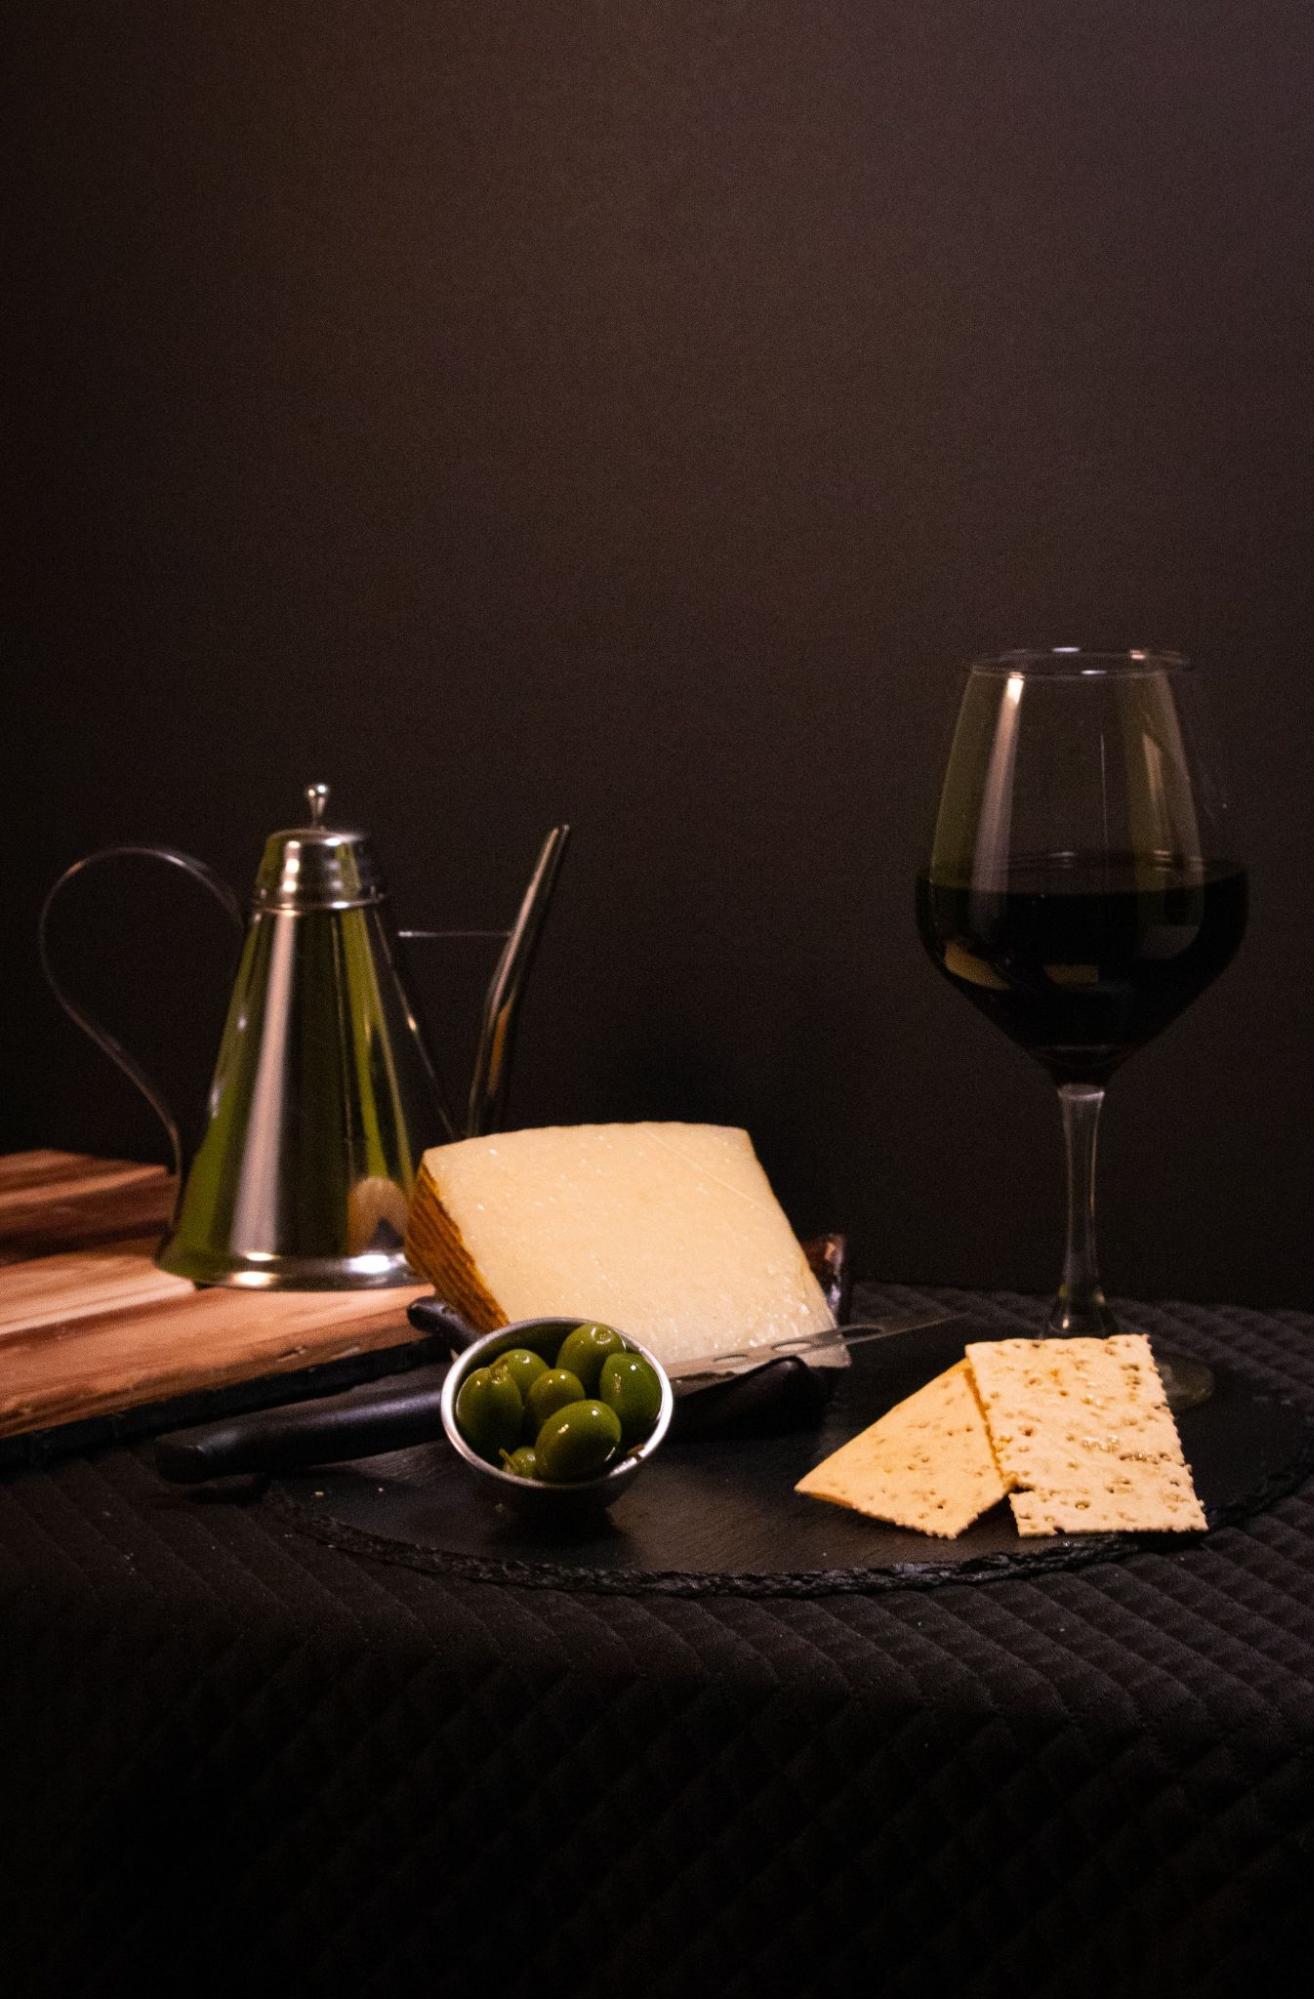 Olives, cheese wedge and crackers with a glass of red wine